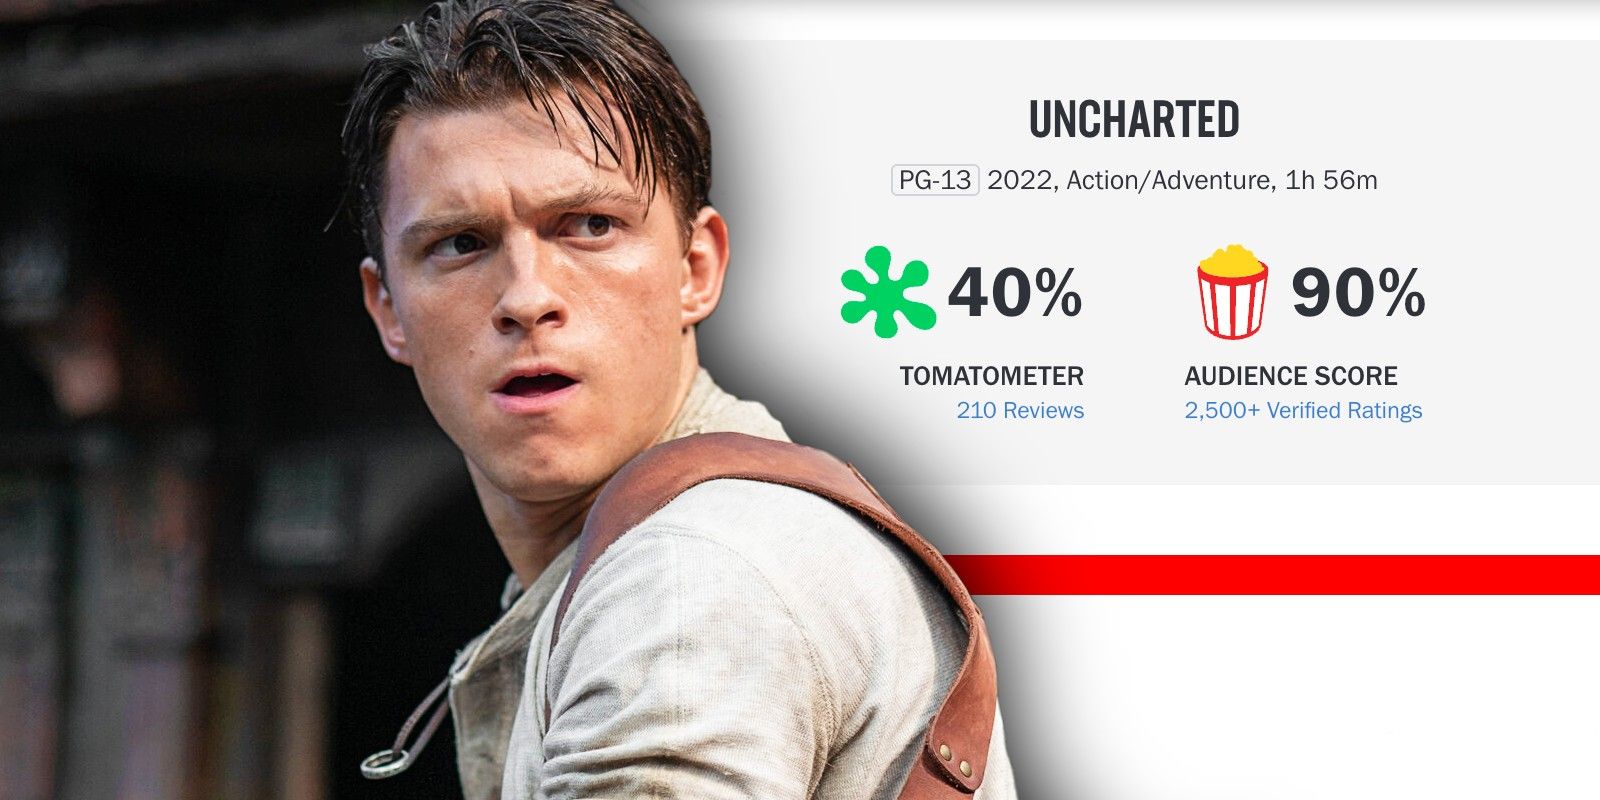 How Uncharted's Box Office Beat The Awful Reviews To Become A Success